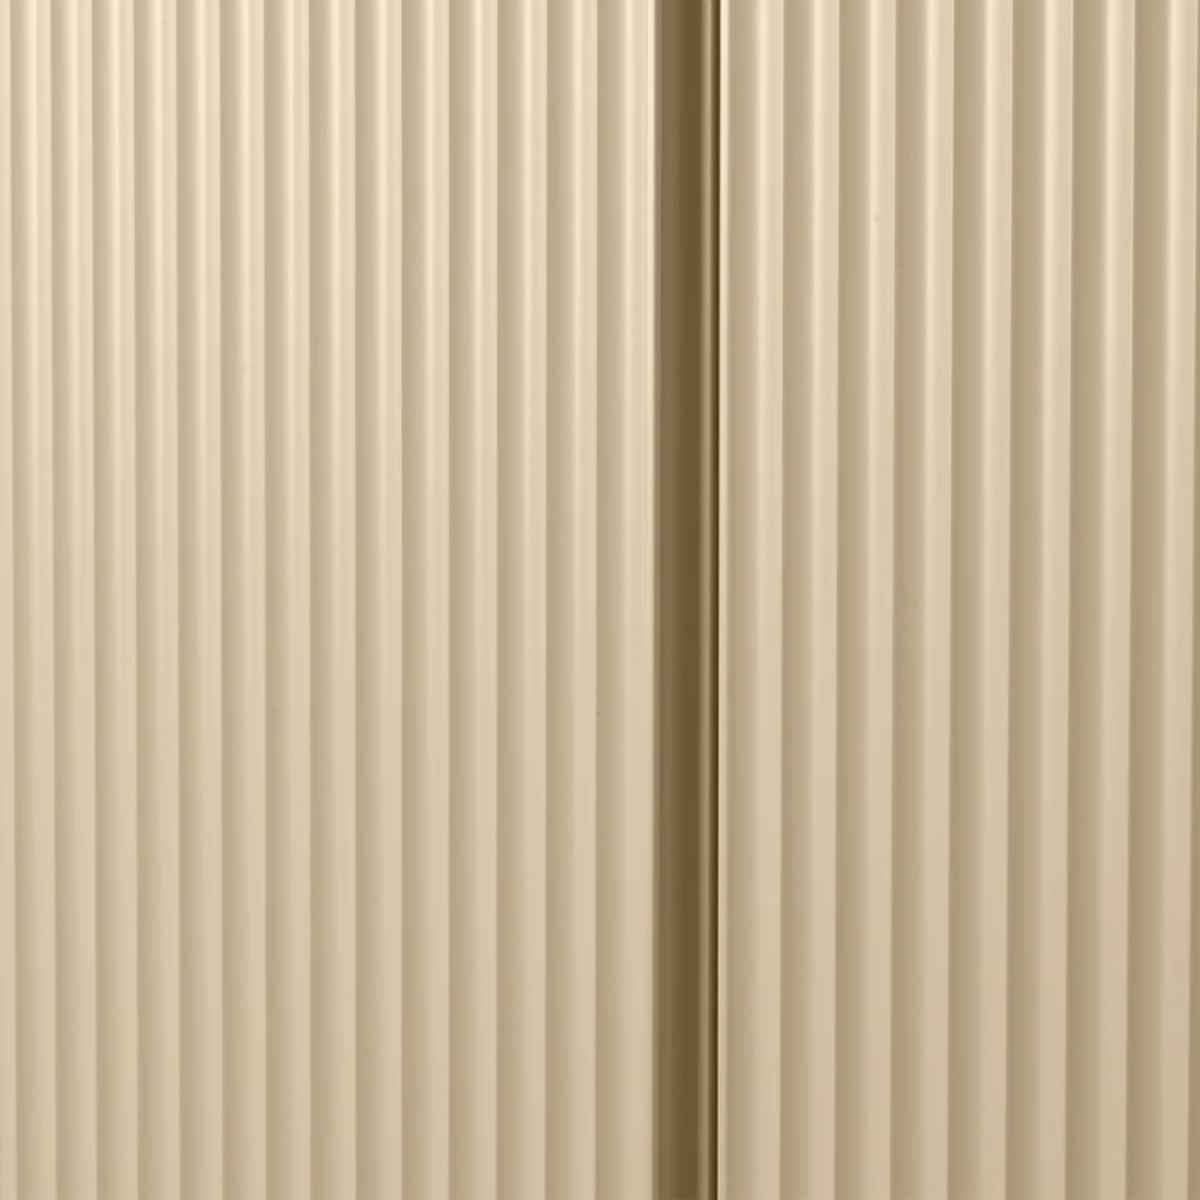 Sill Cupboard Low Cashmere - ferm LIVING